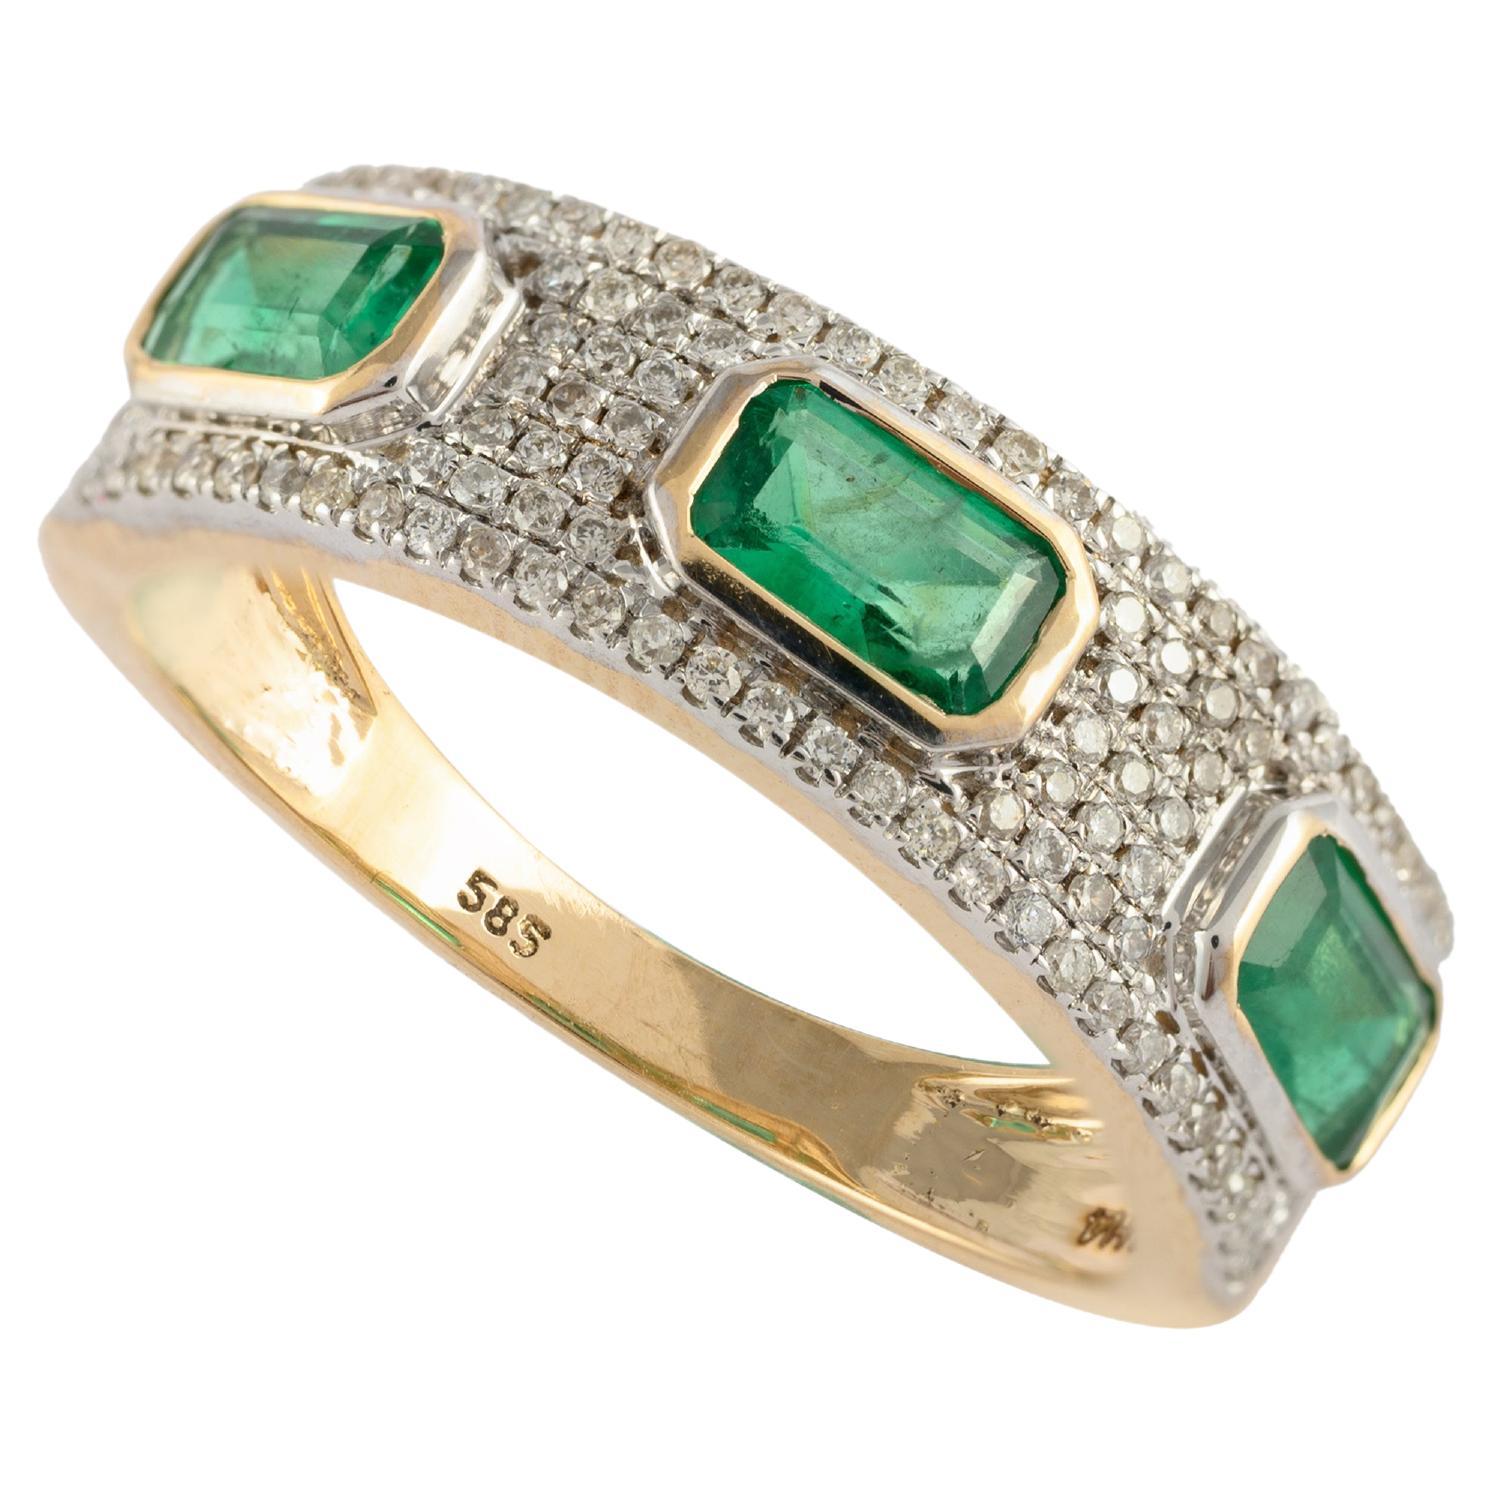 Impeccable 14k Yellow Gold Three Stone Emerald and Diamond Engagement Ring